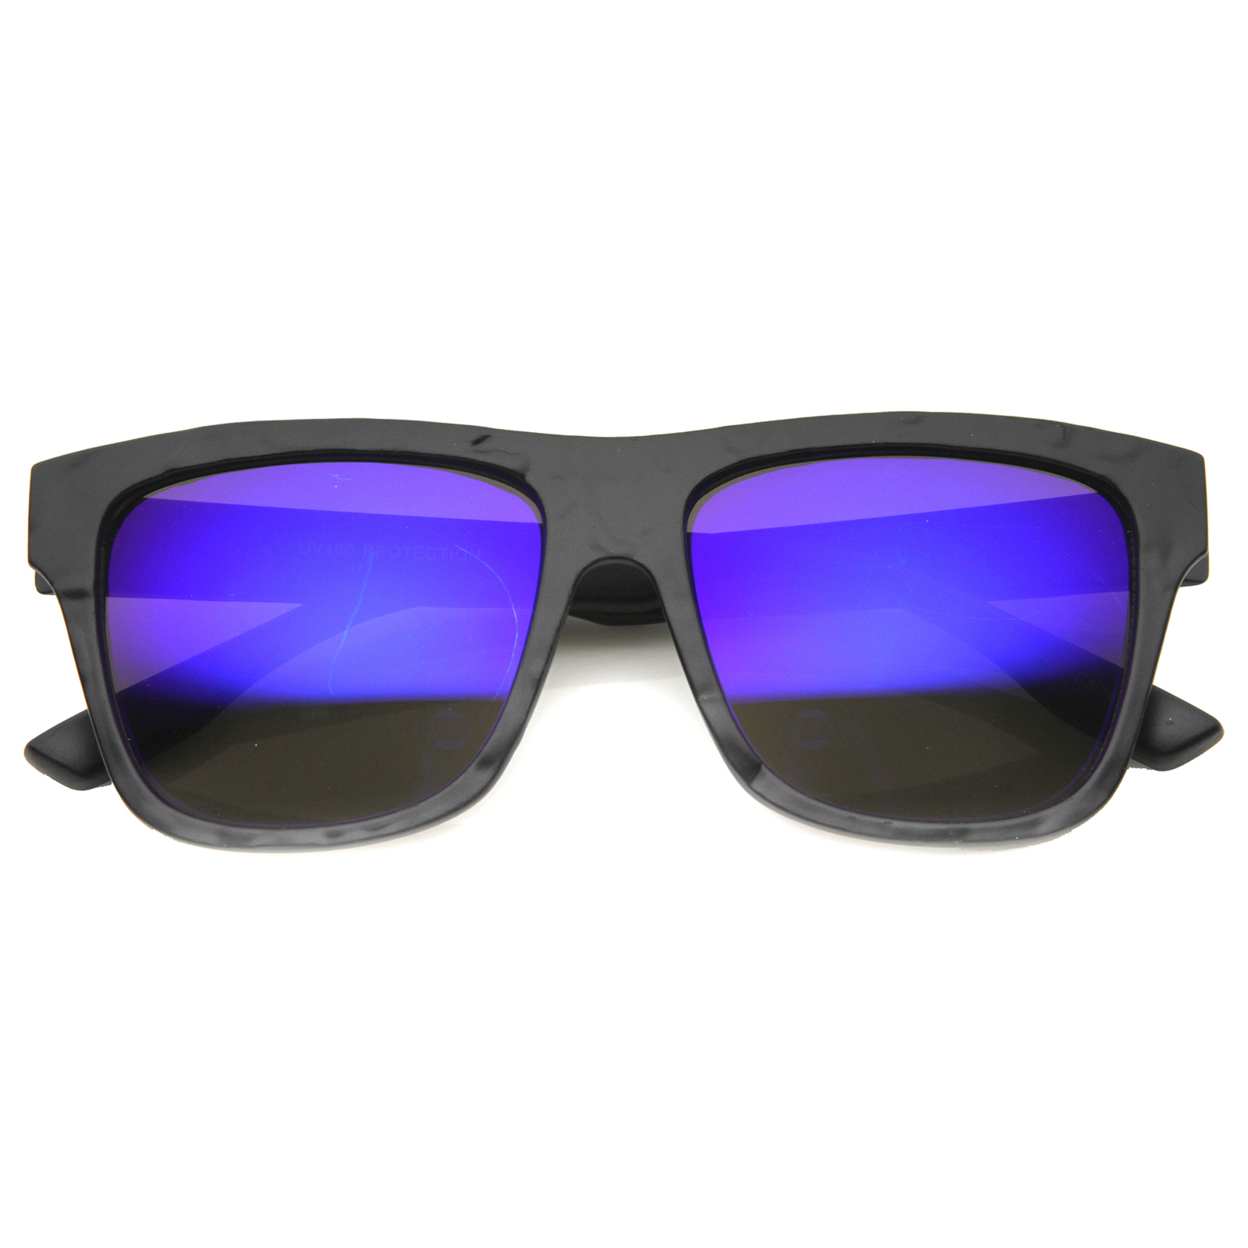 Unisex Horn Rimmed Sunglasses With UV400 Protected Mirrored Lens 9864 - Shiny-Black / Fire